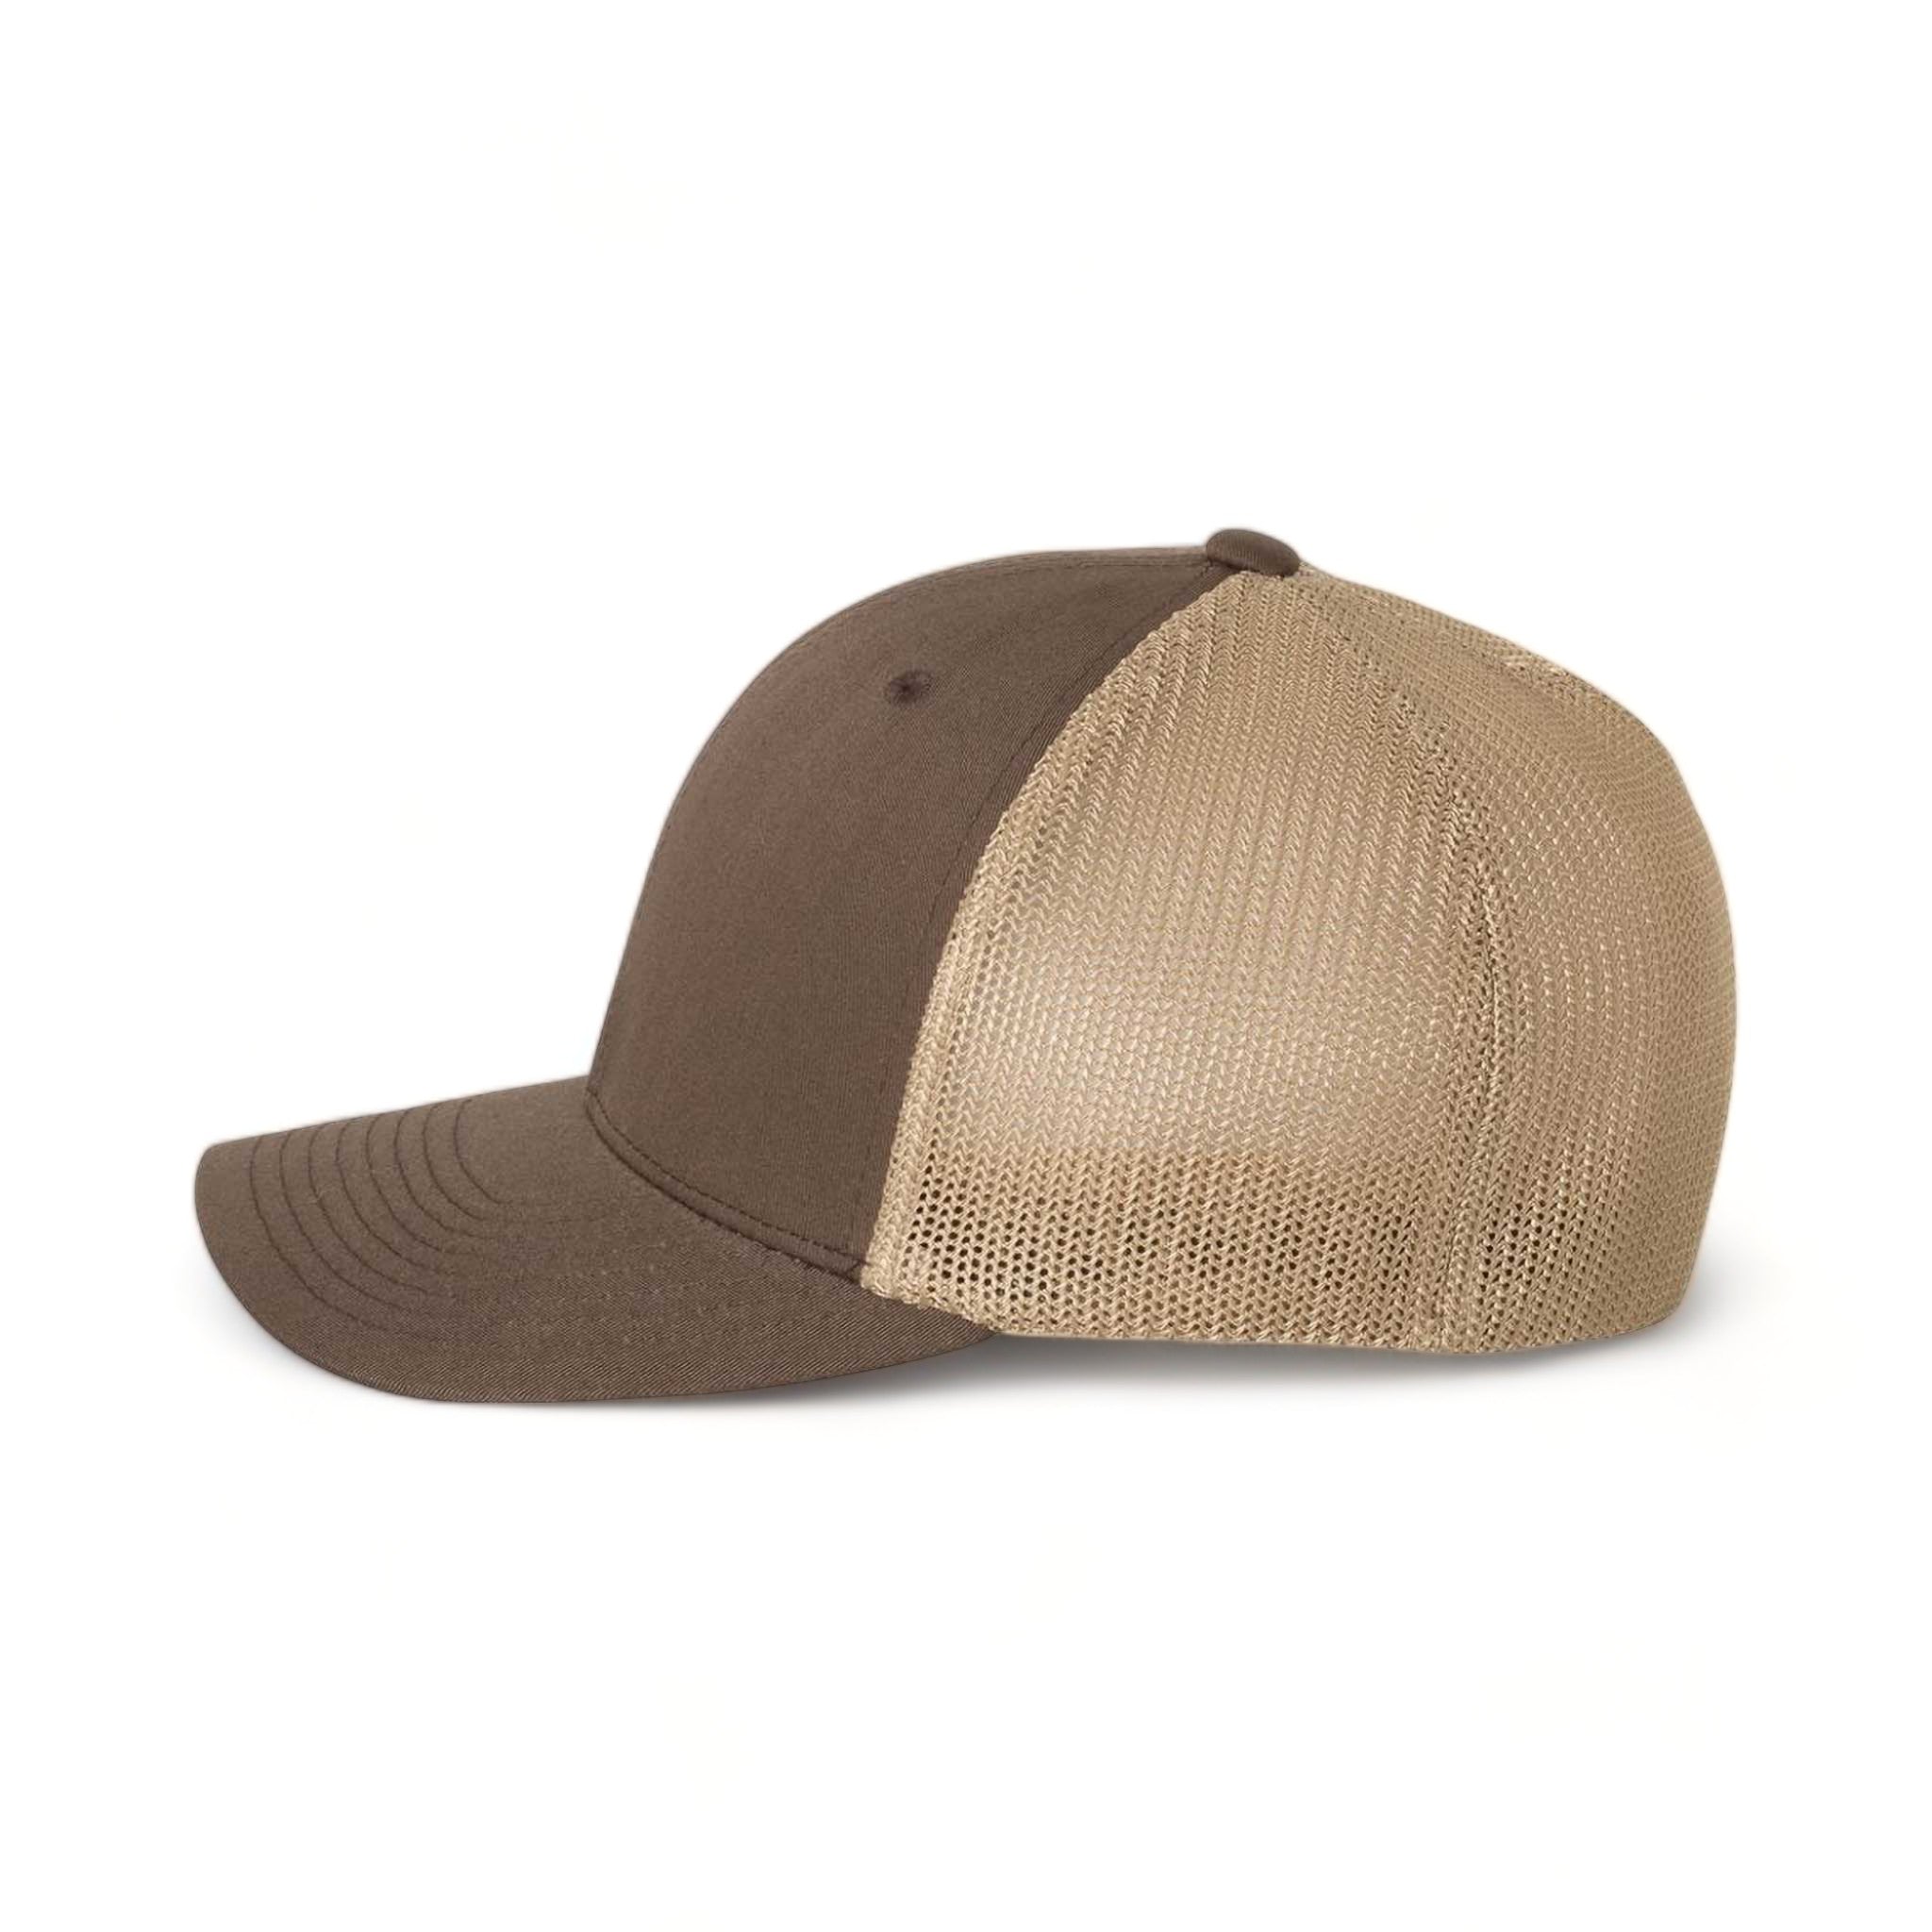 Side view of Flexfit 6511 custom hat in brown and khaki